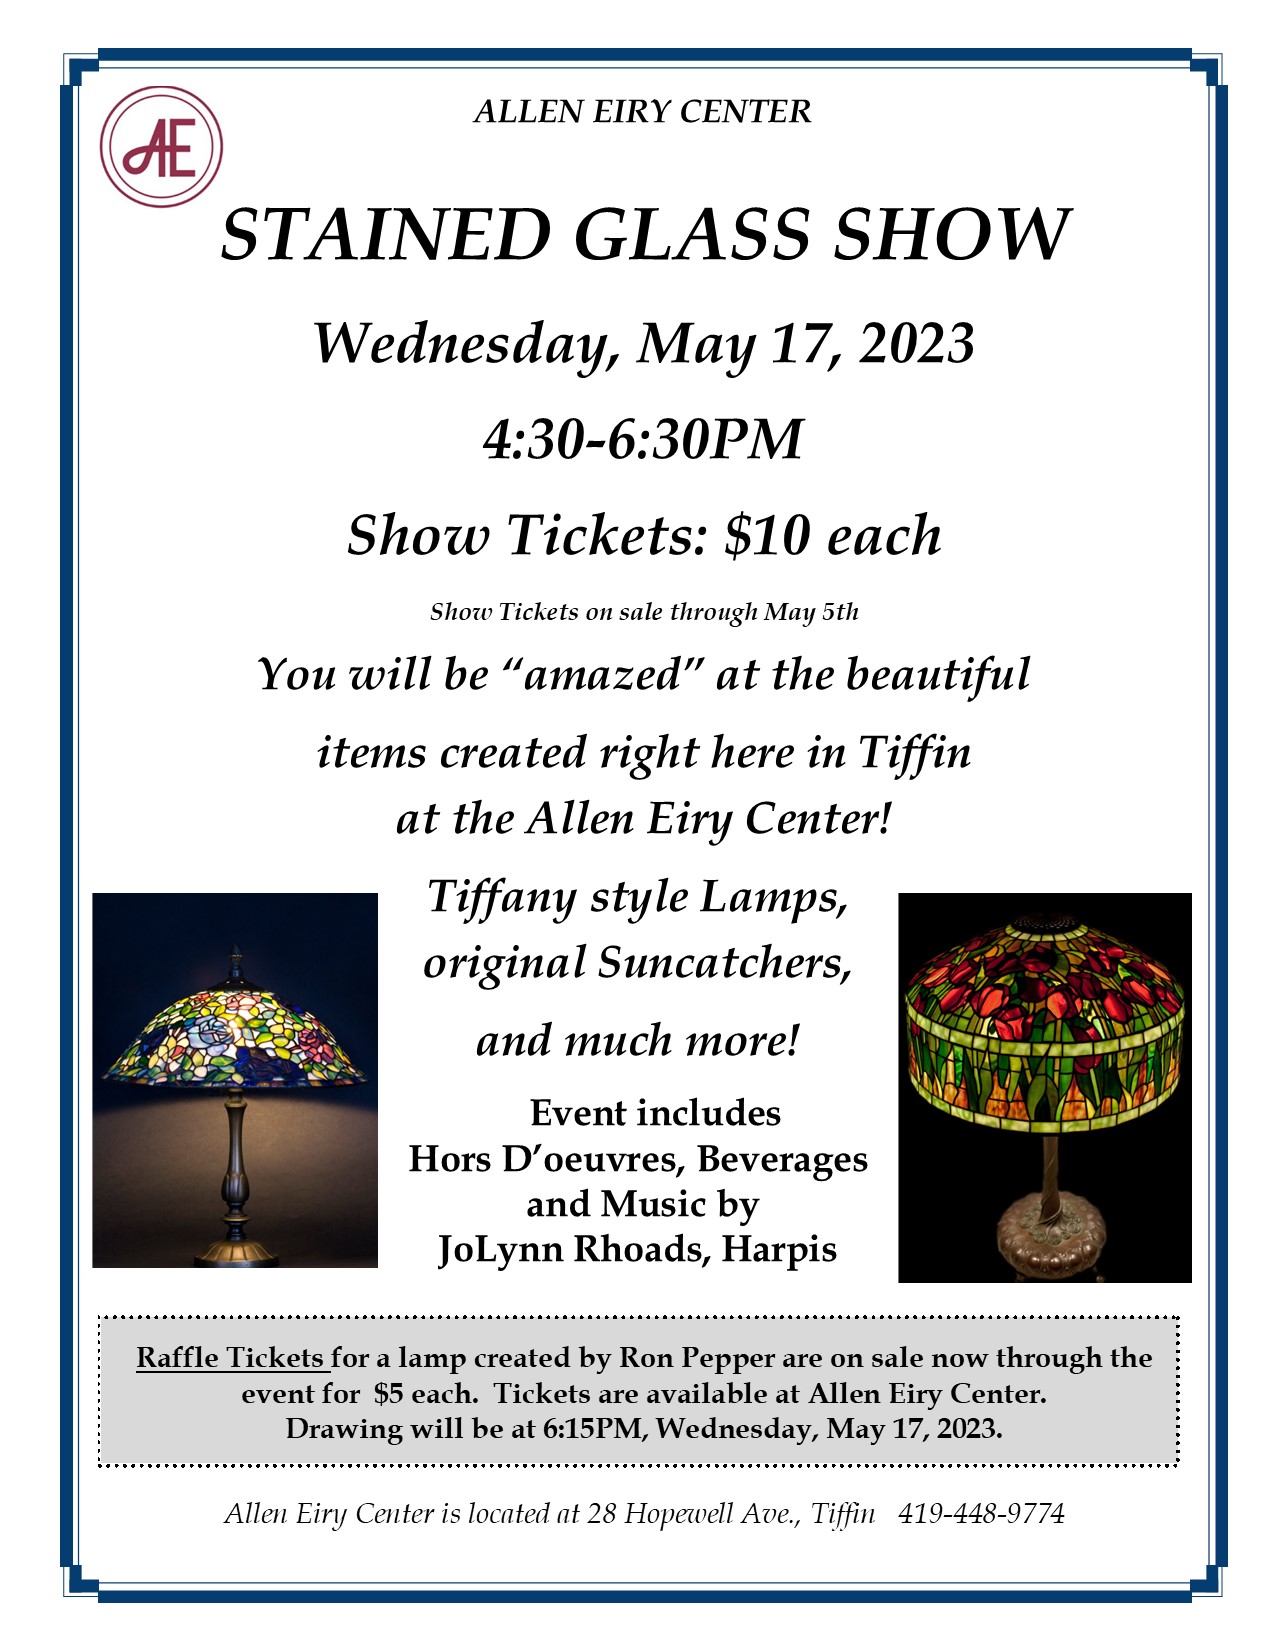 Allen Eiry Center Stained Glass Show